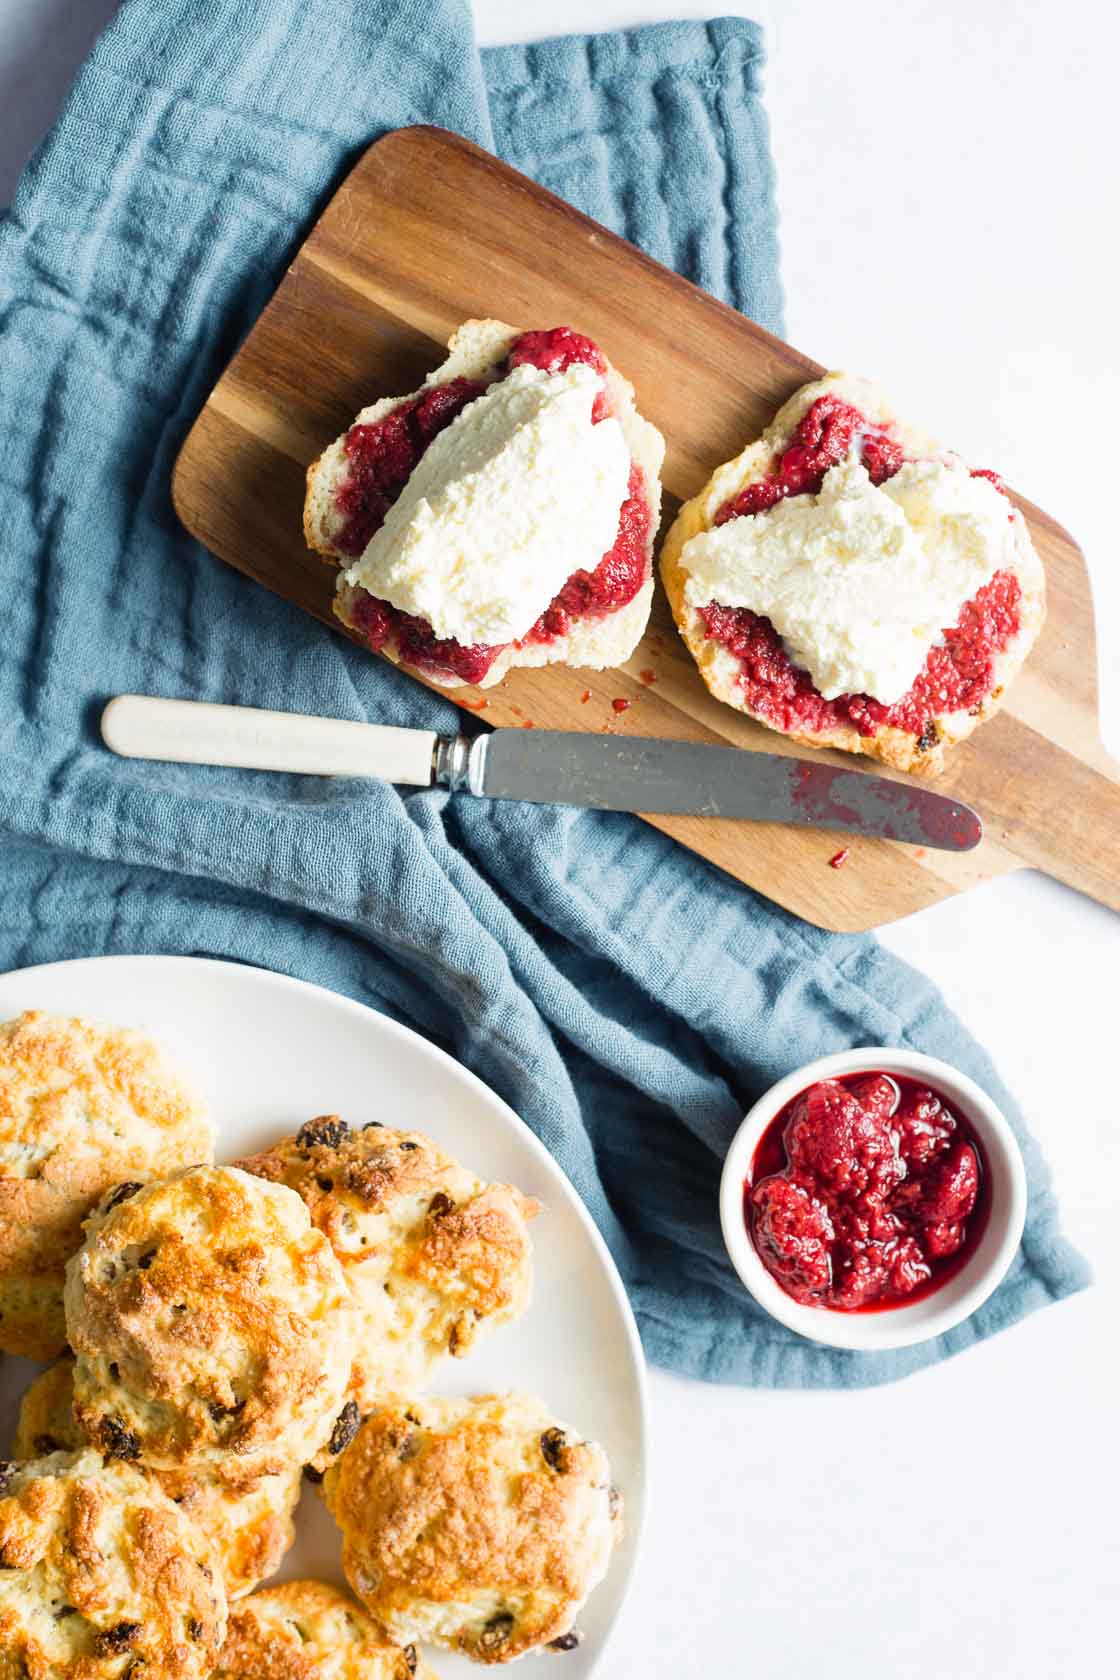 Overhead shot of scones with clotted cream and jam on wooden board